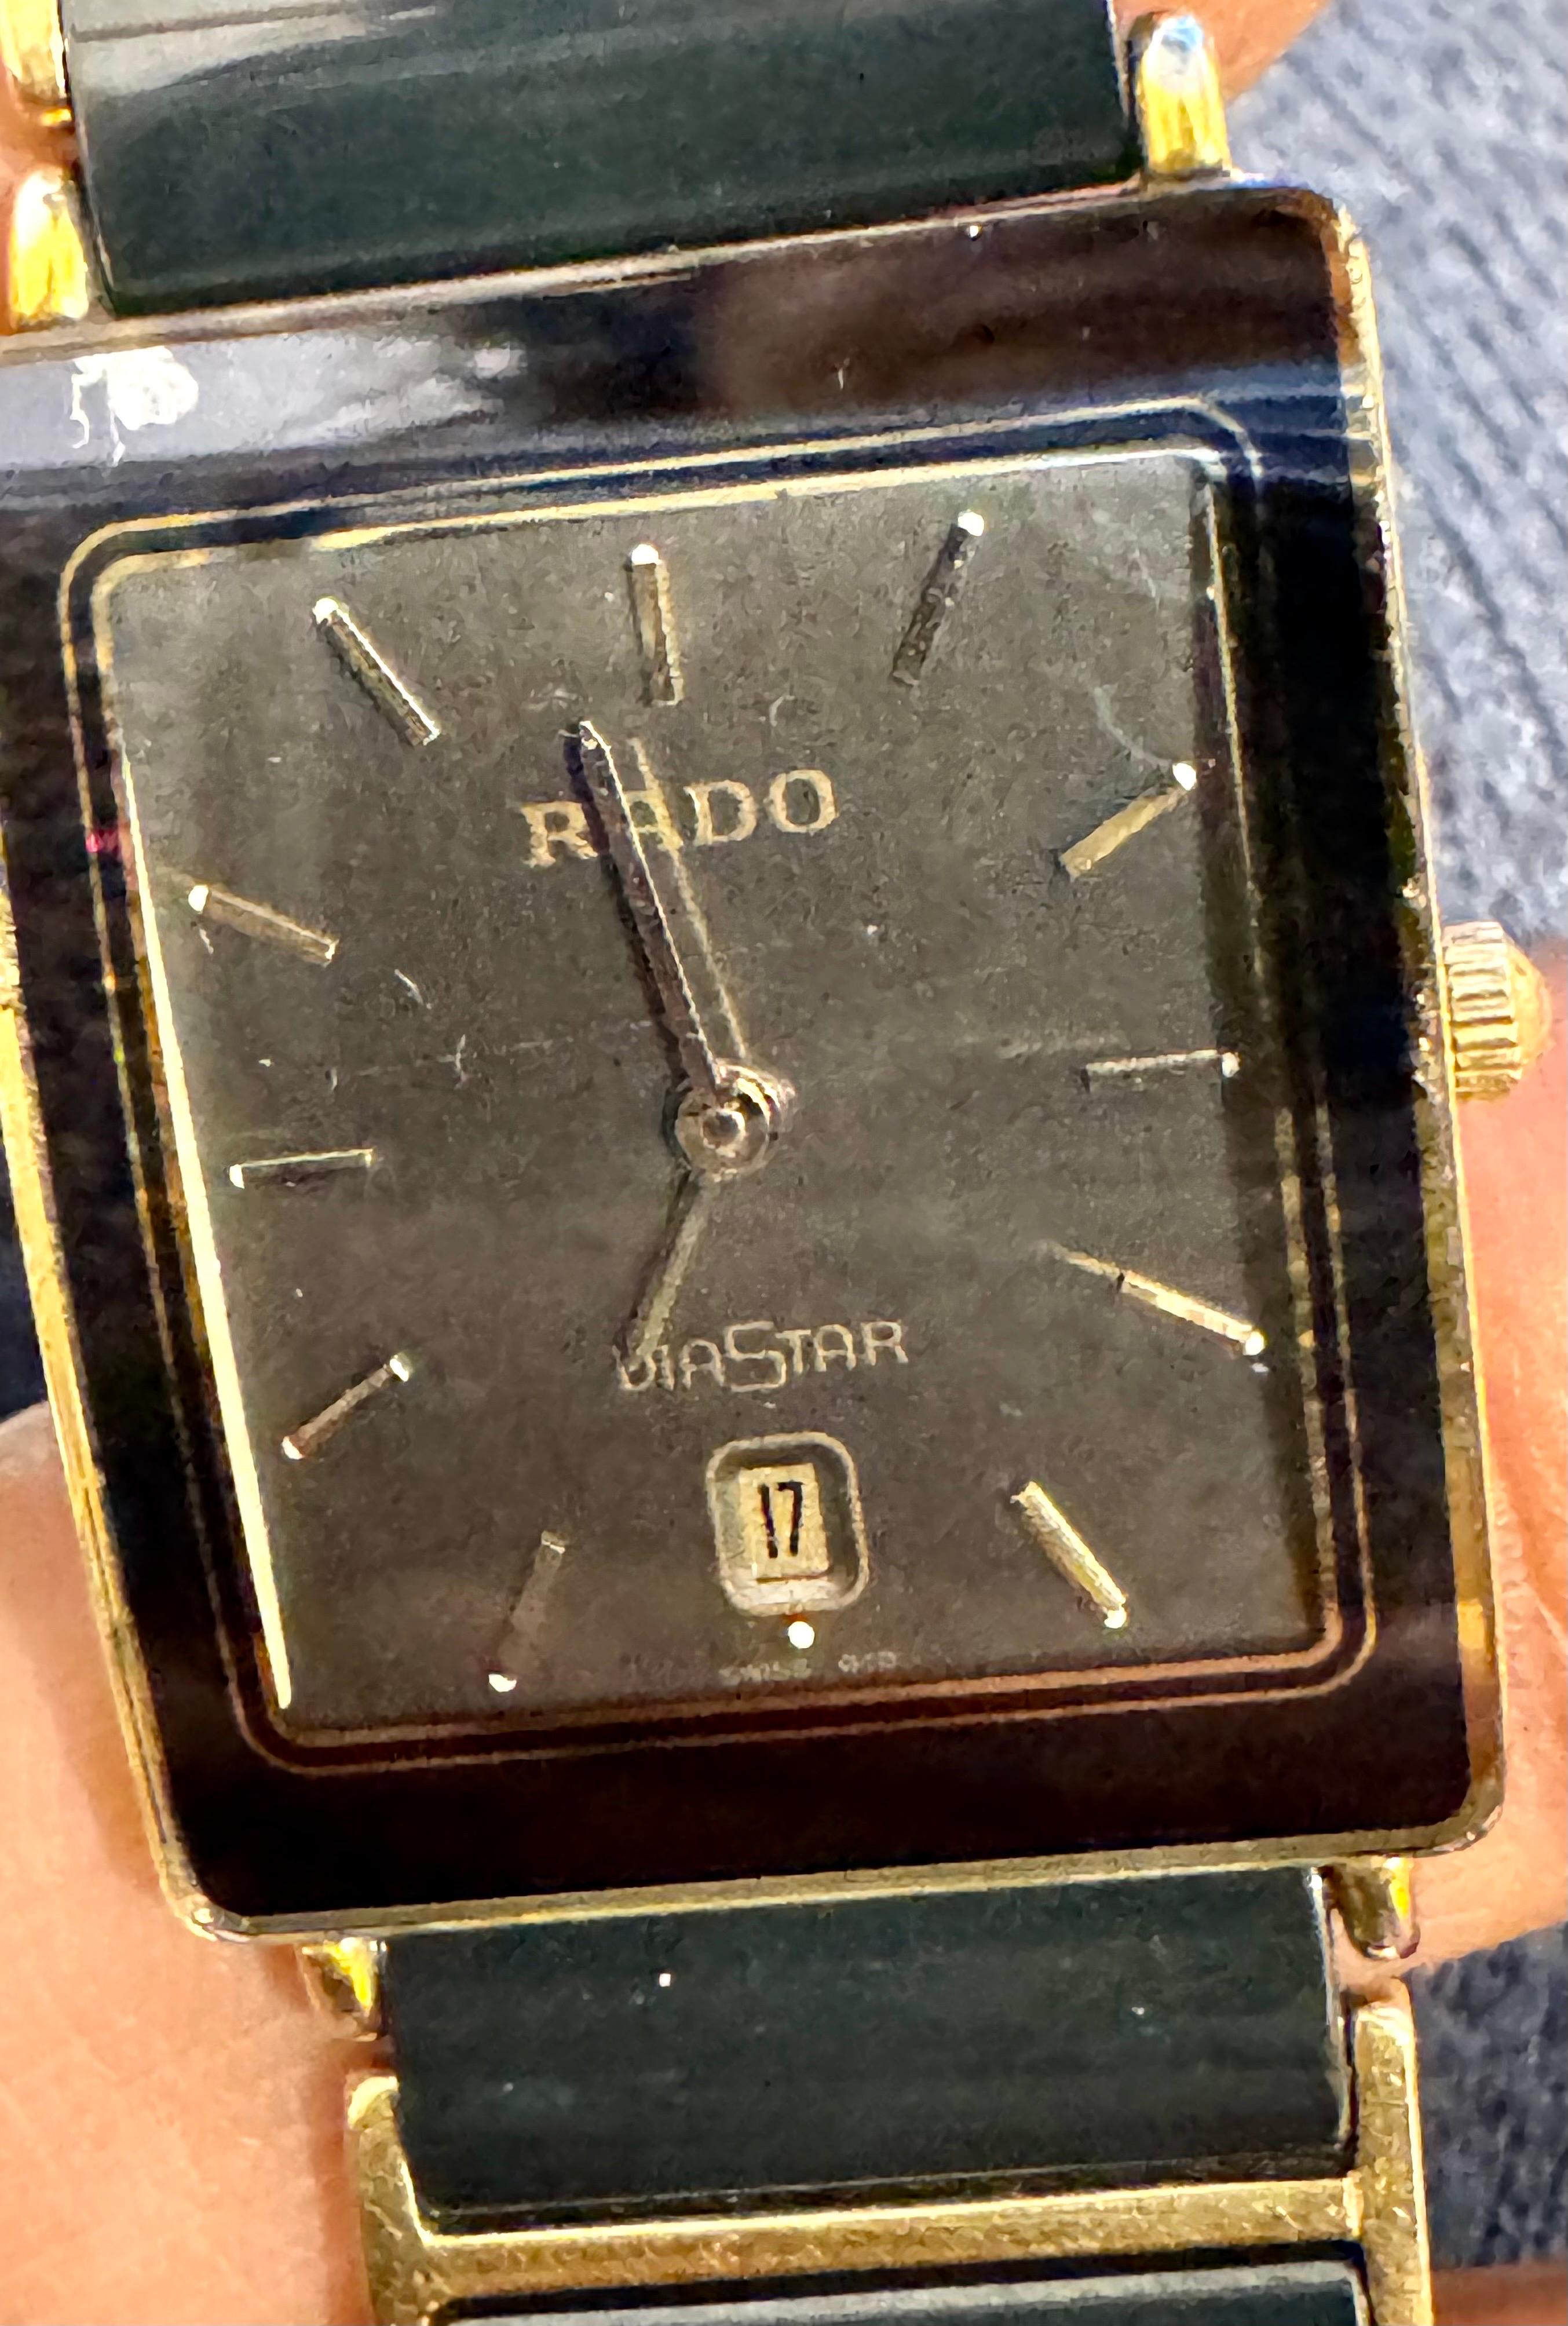 Rado DIRSTAR S bracelet watch - scratch proof, water sealed, high tech ceramics. In Good Condition For Sale In New York, NY